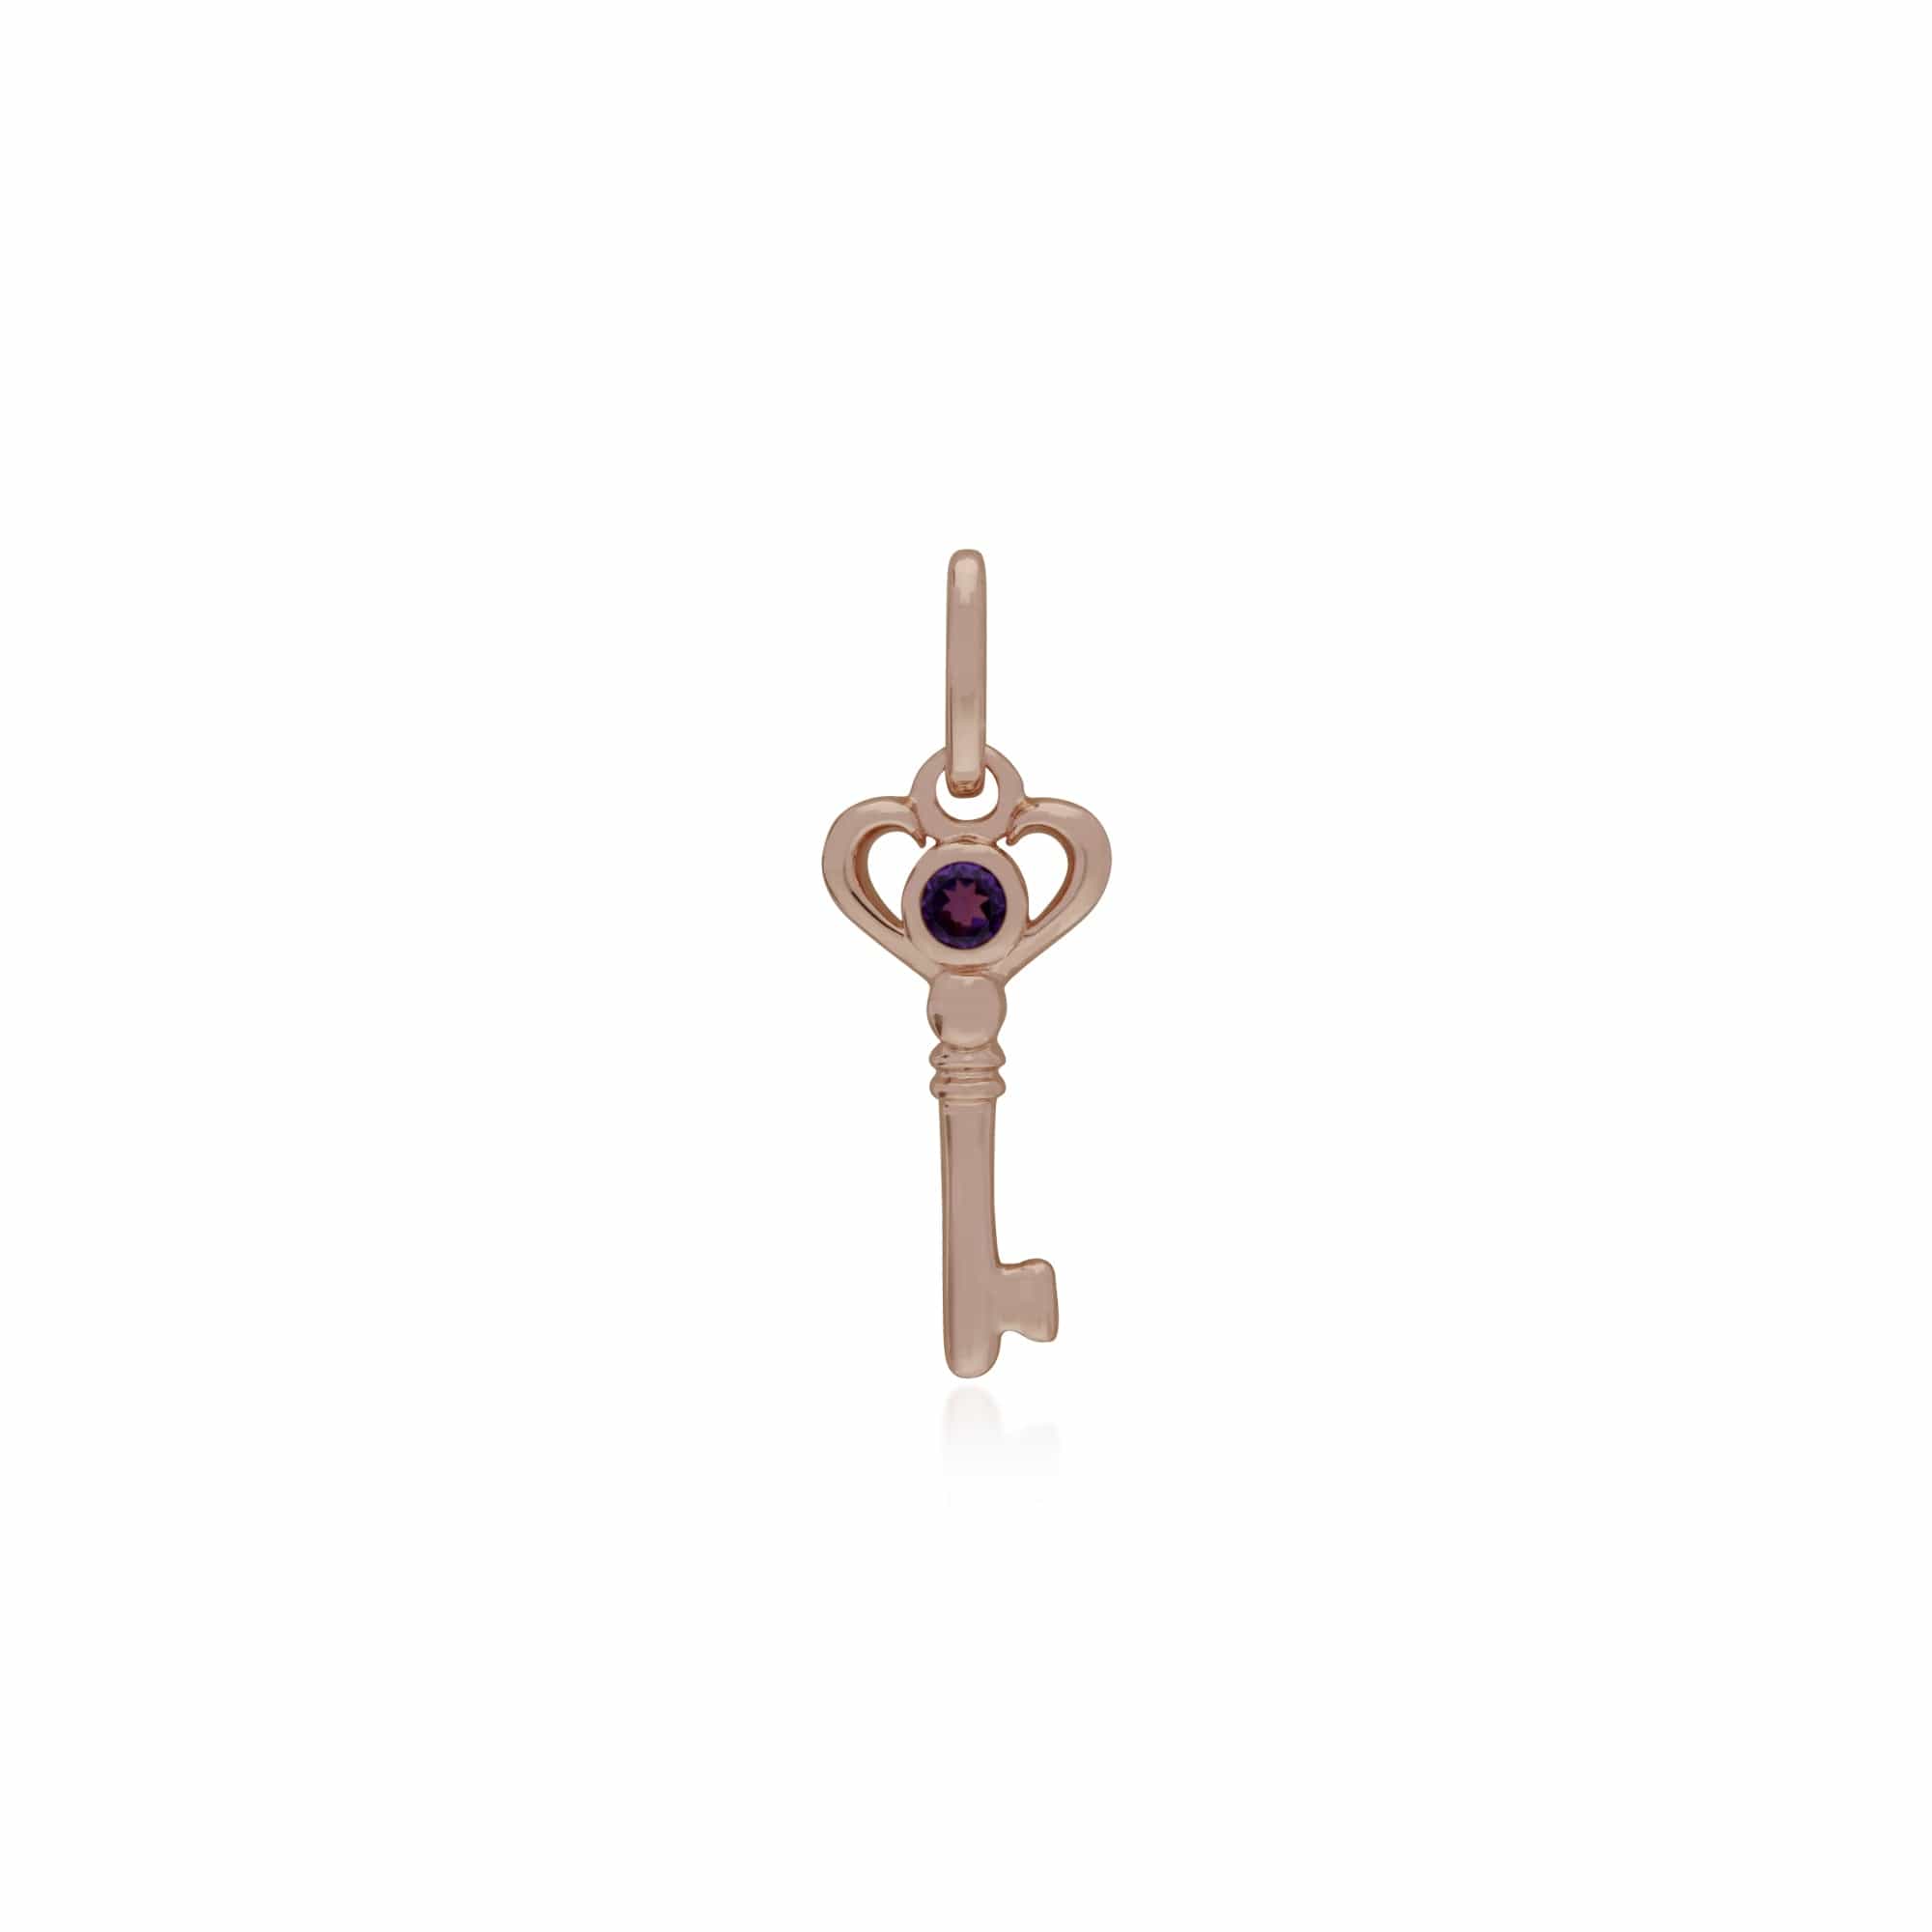 270P026304925-270P026901925 Classic Heart Lock Pendant & Amethyst Key Charm in Rose Gold Plated 925 Sterling Silver 2